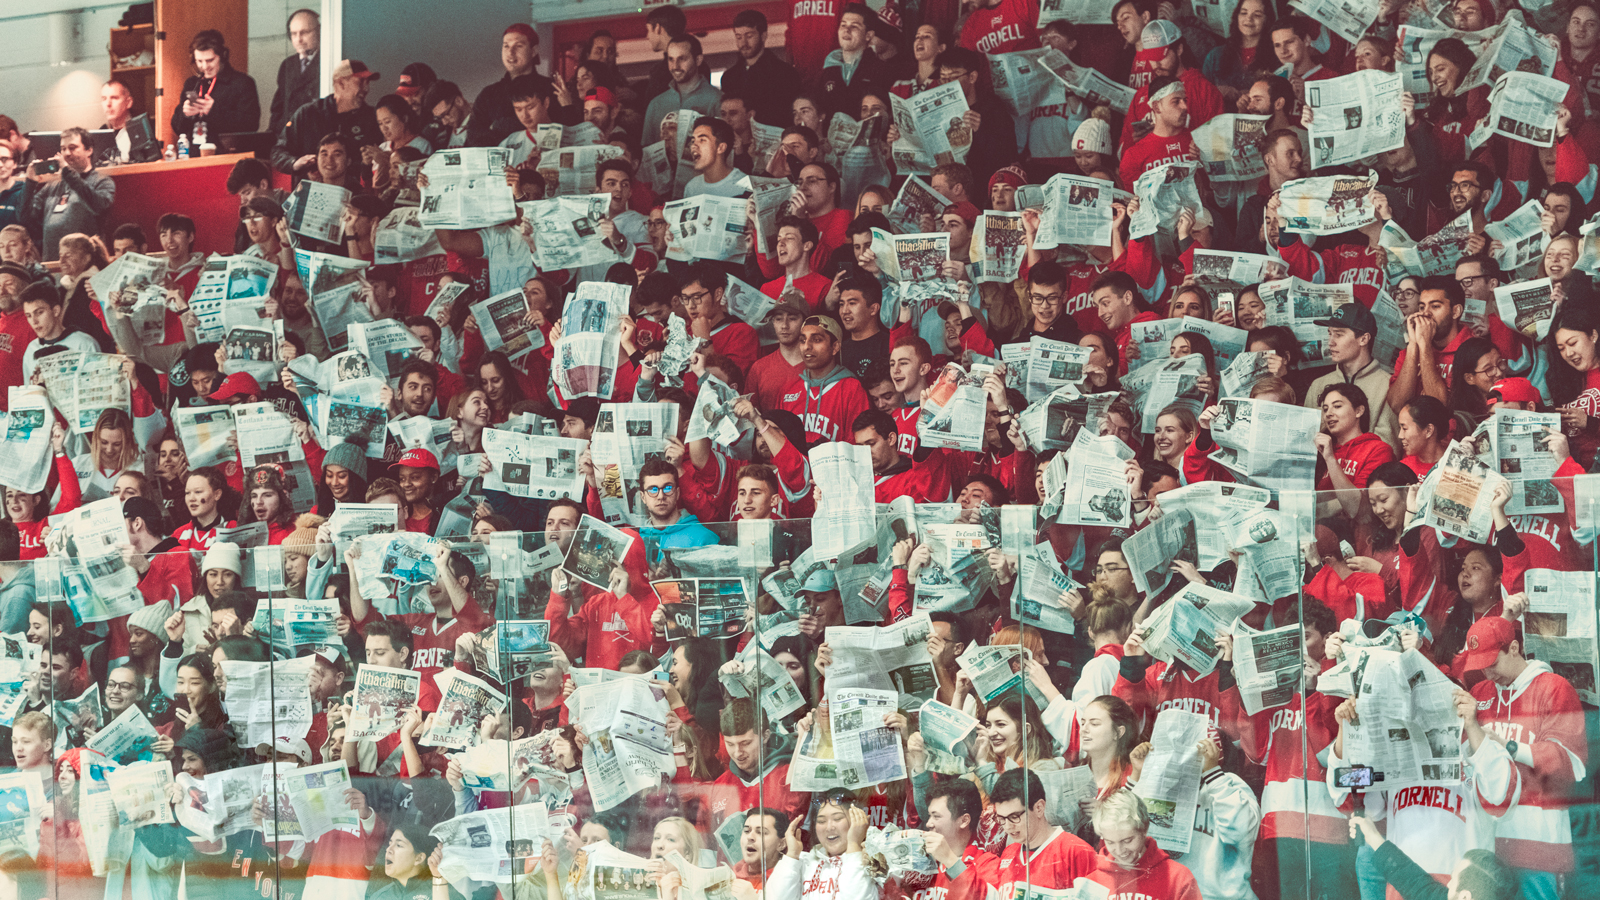 Fans reading newspapers at a Cornell hockey game